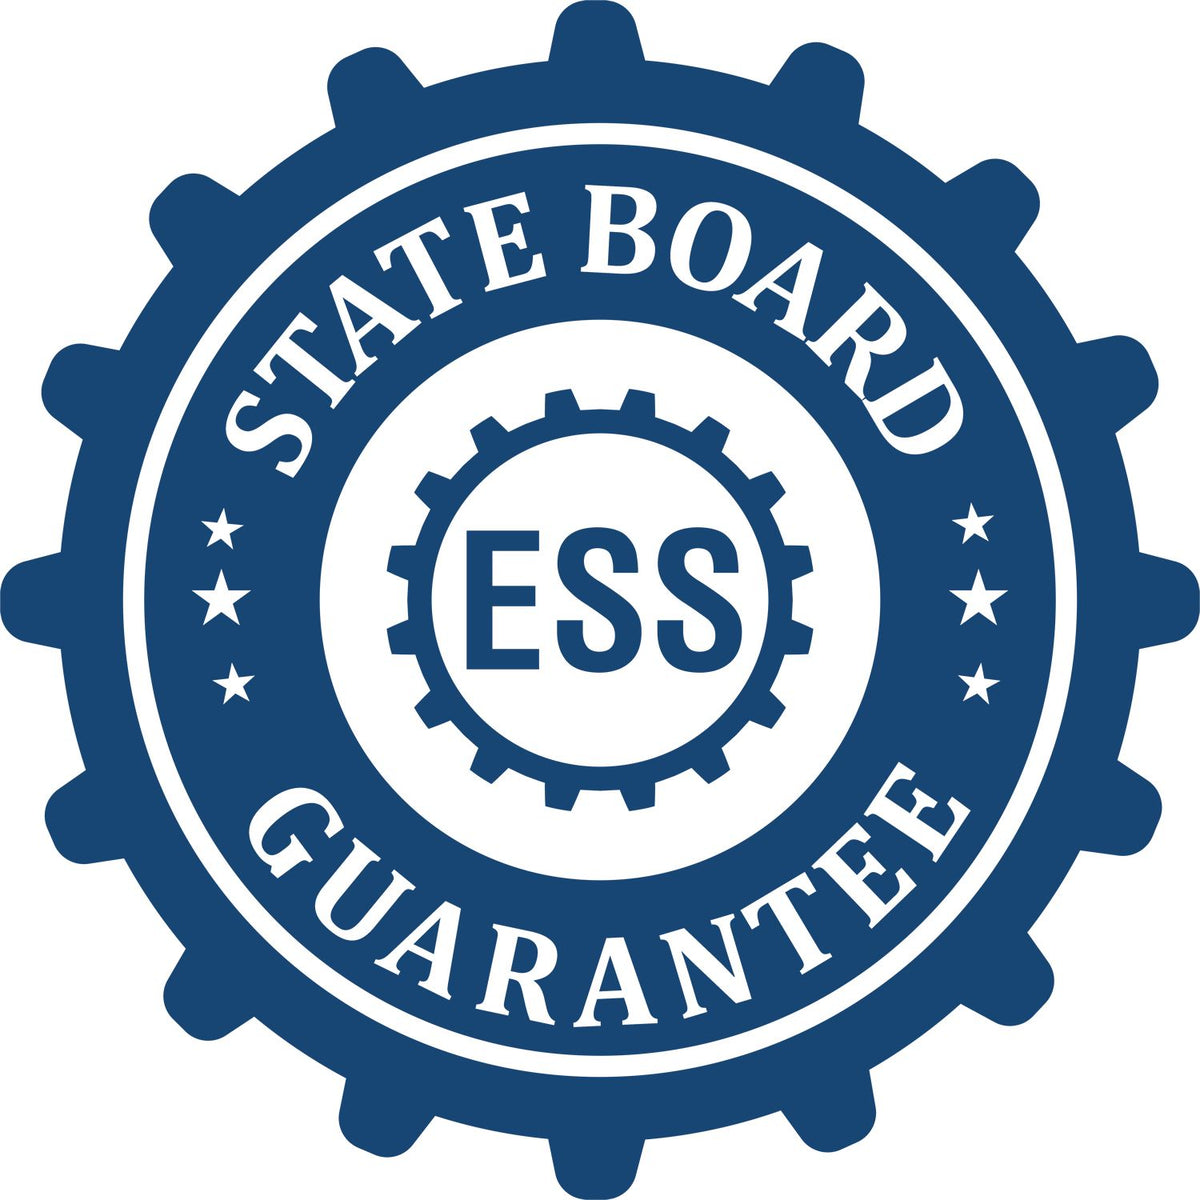 An emblem in a gear shape illustrating a state board guarantee for the Florida Engineer Desk Seal product.